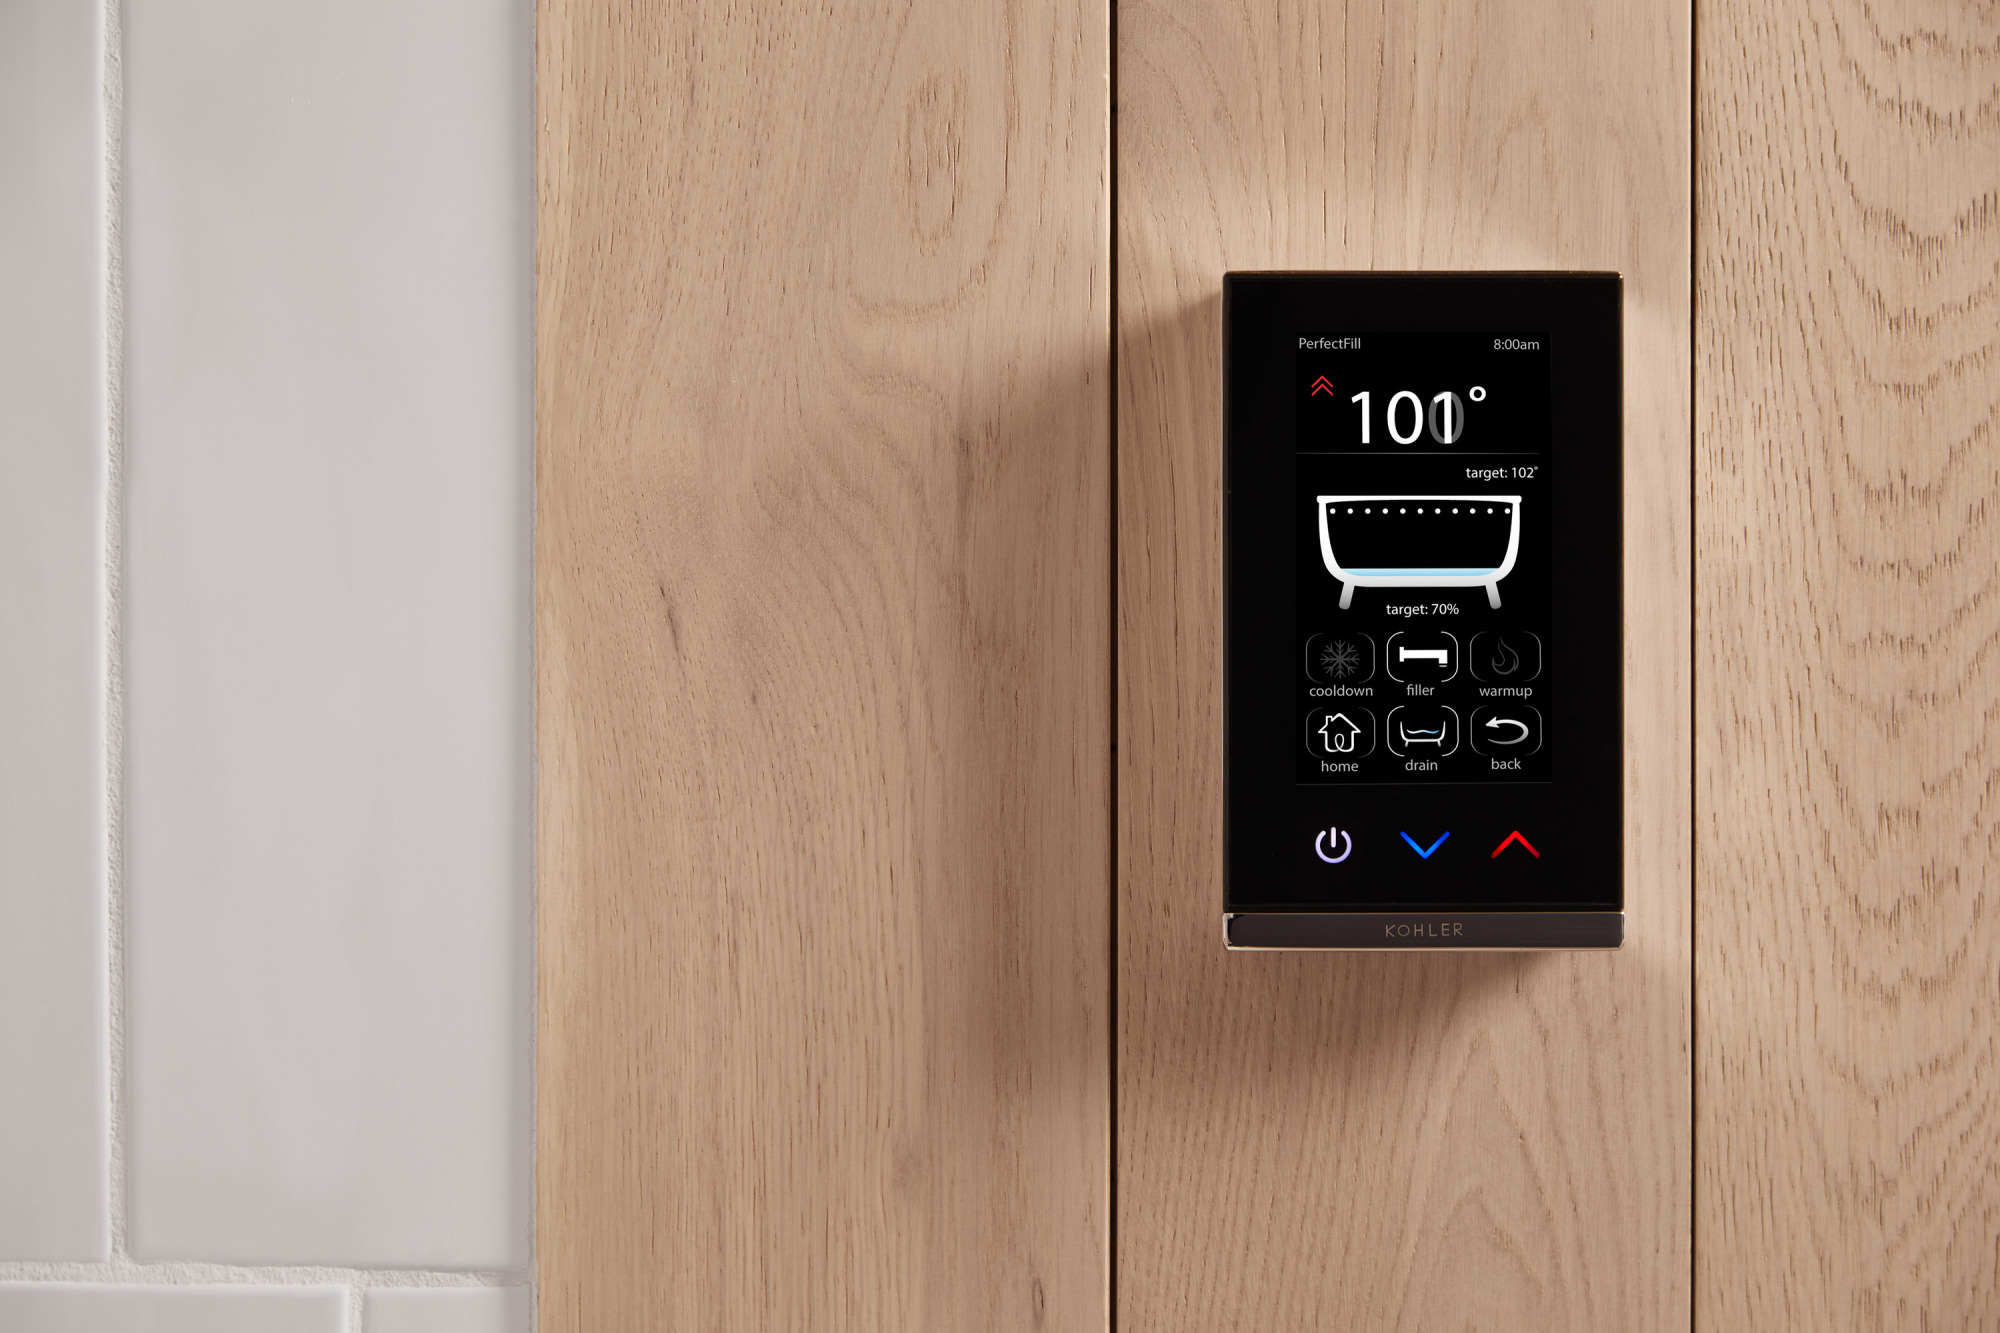 A digital interface mounted on a bathroom wall shows the PerfectFill system.